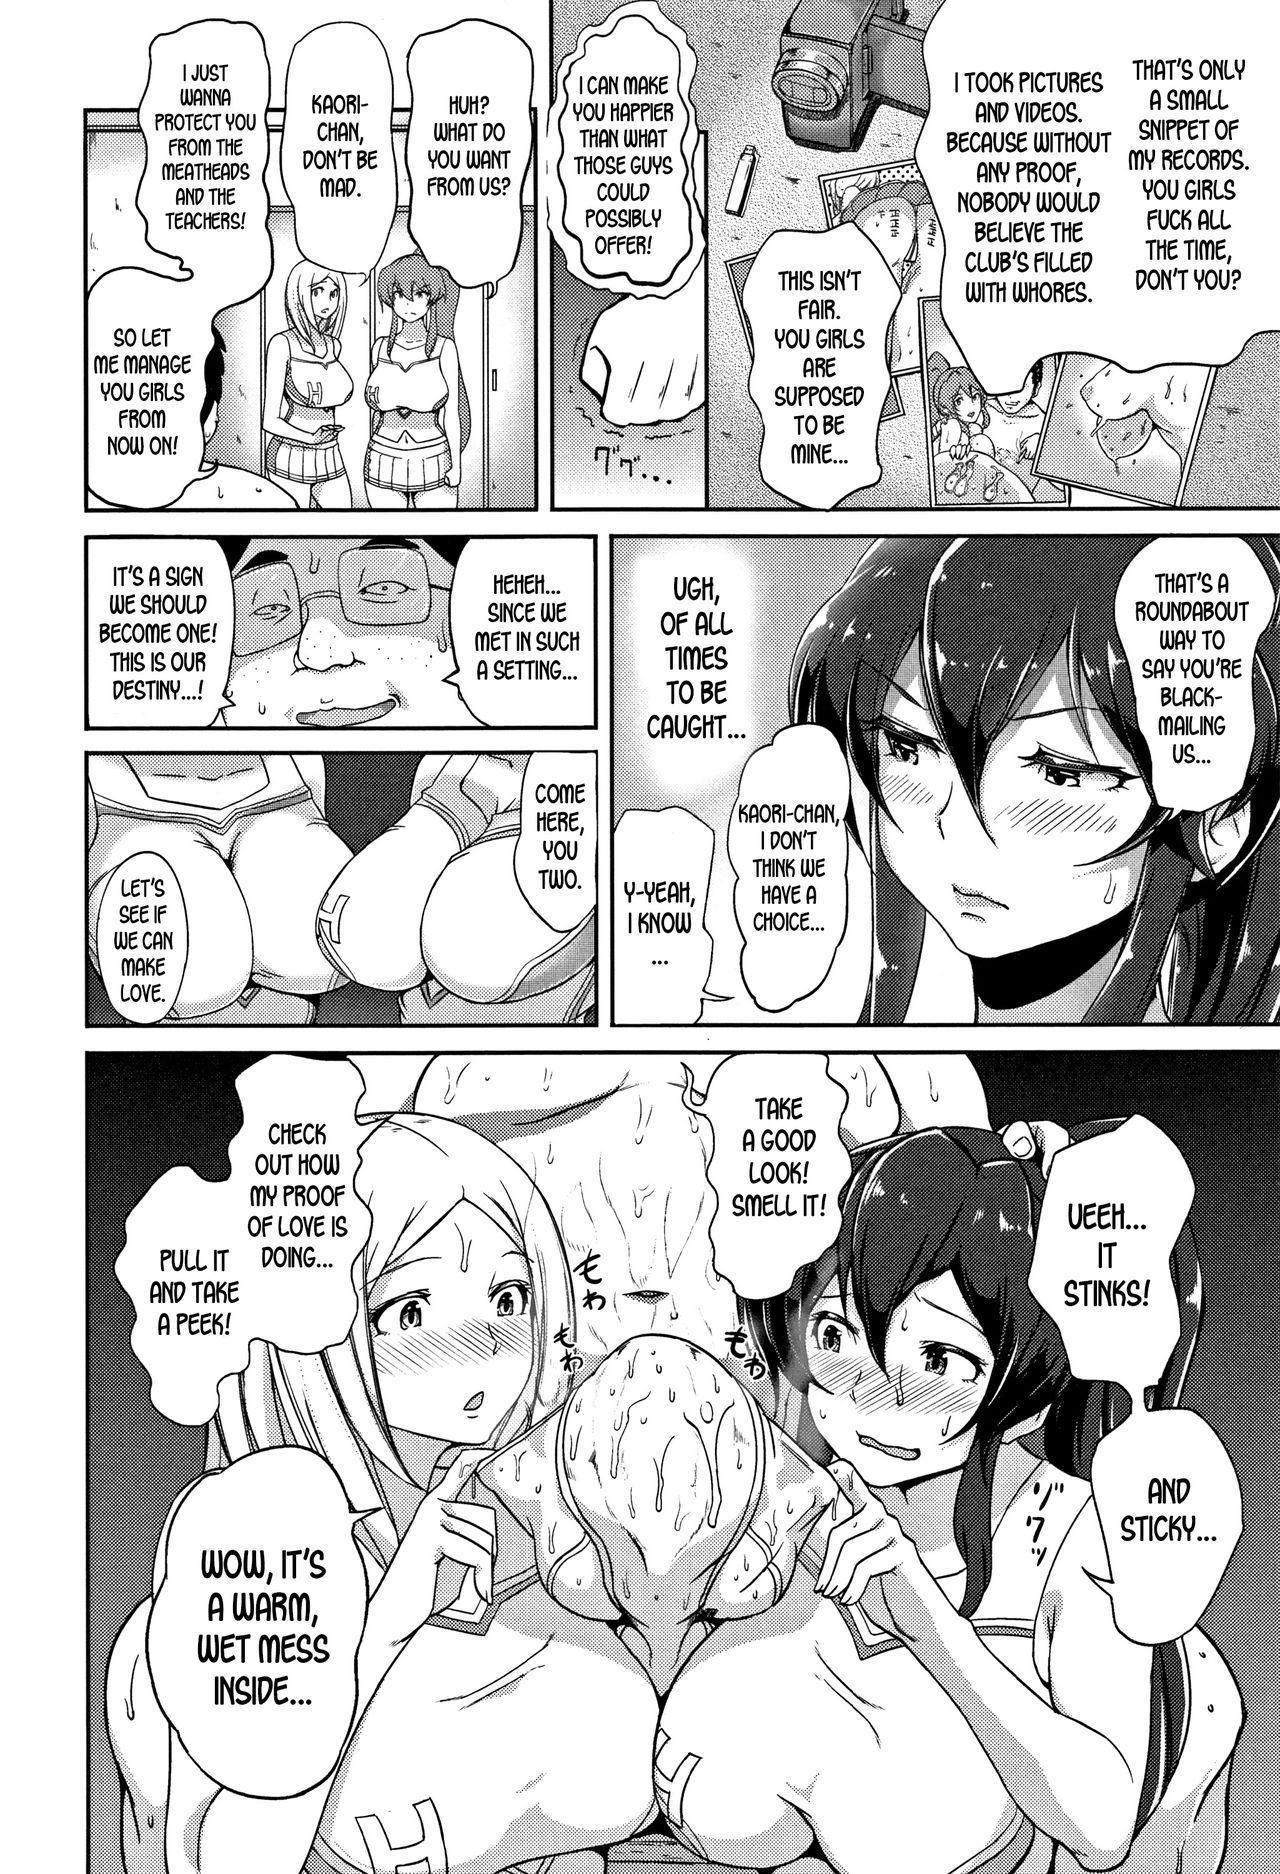 Puta Inshuu Cheer Girl | Lewd Scent Cheer Girls Couch - Page 8